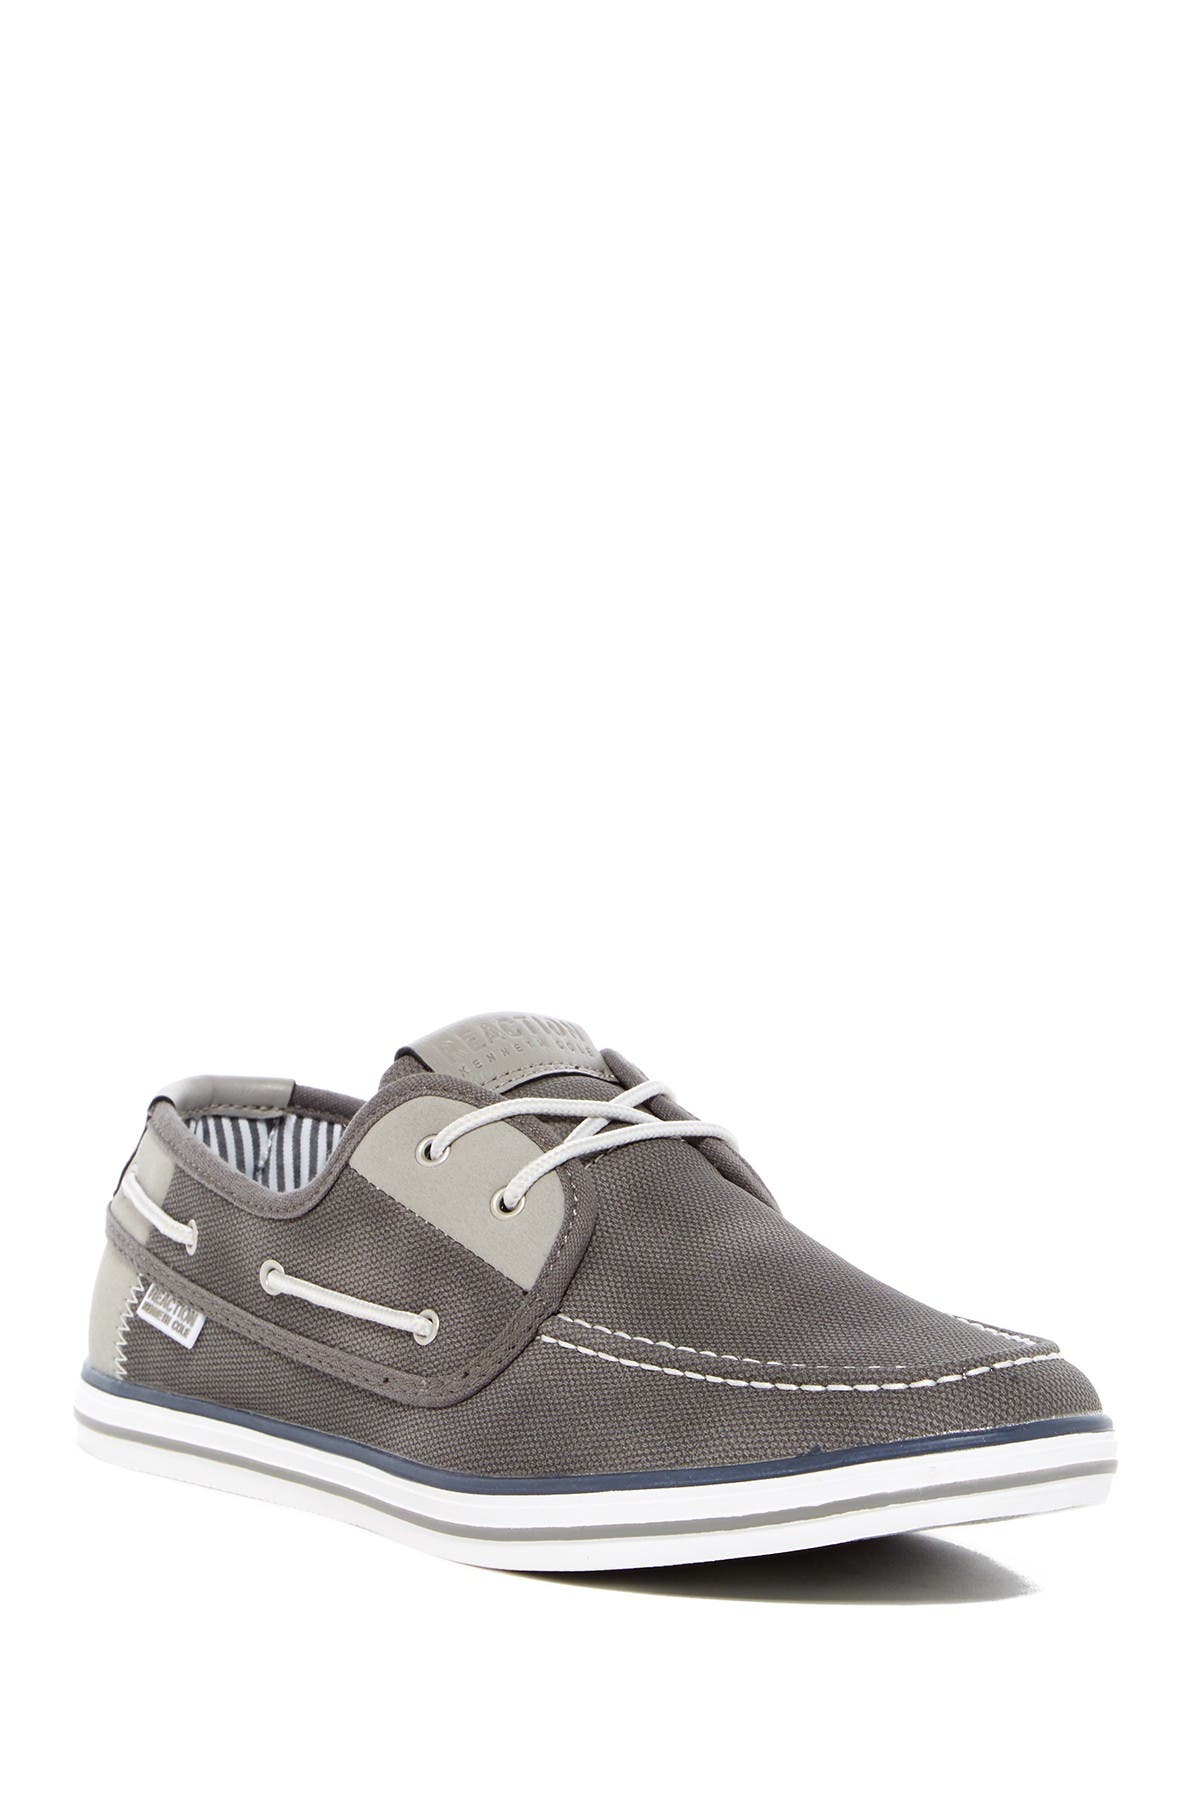 kenneth cole baby boat shoes